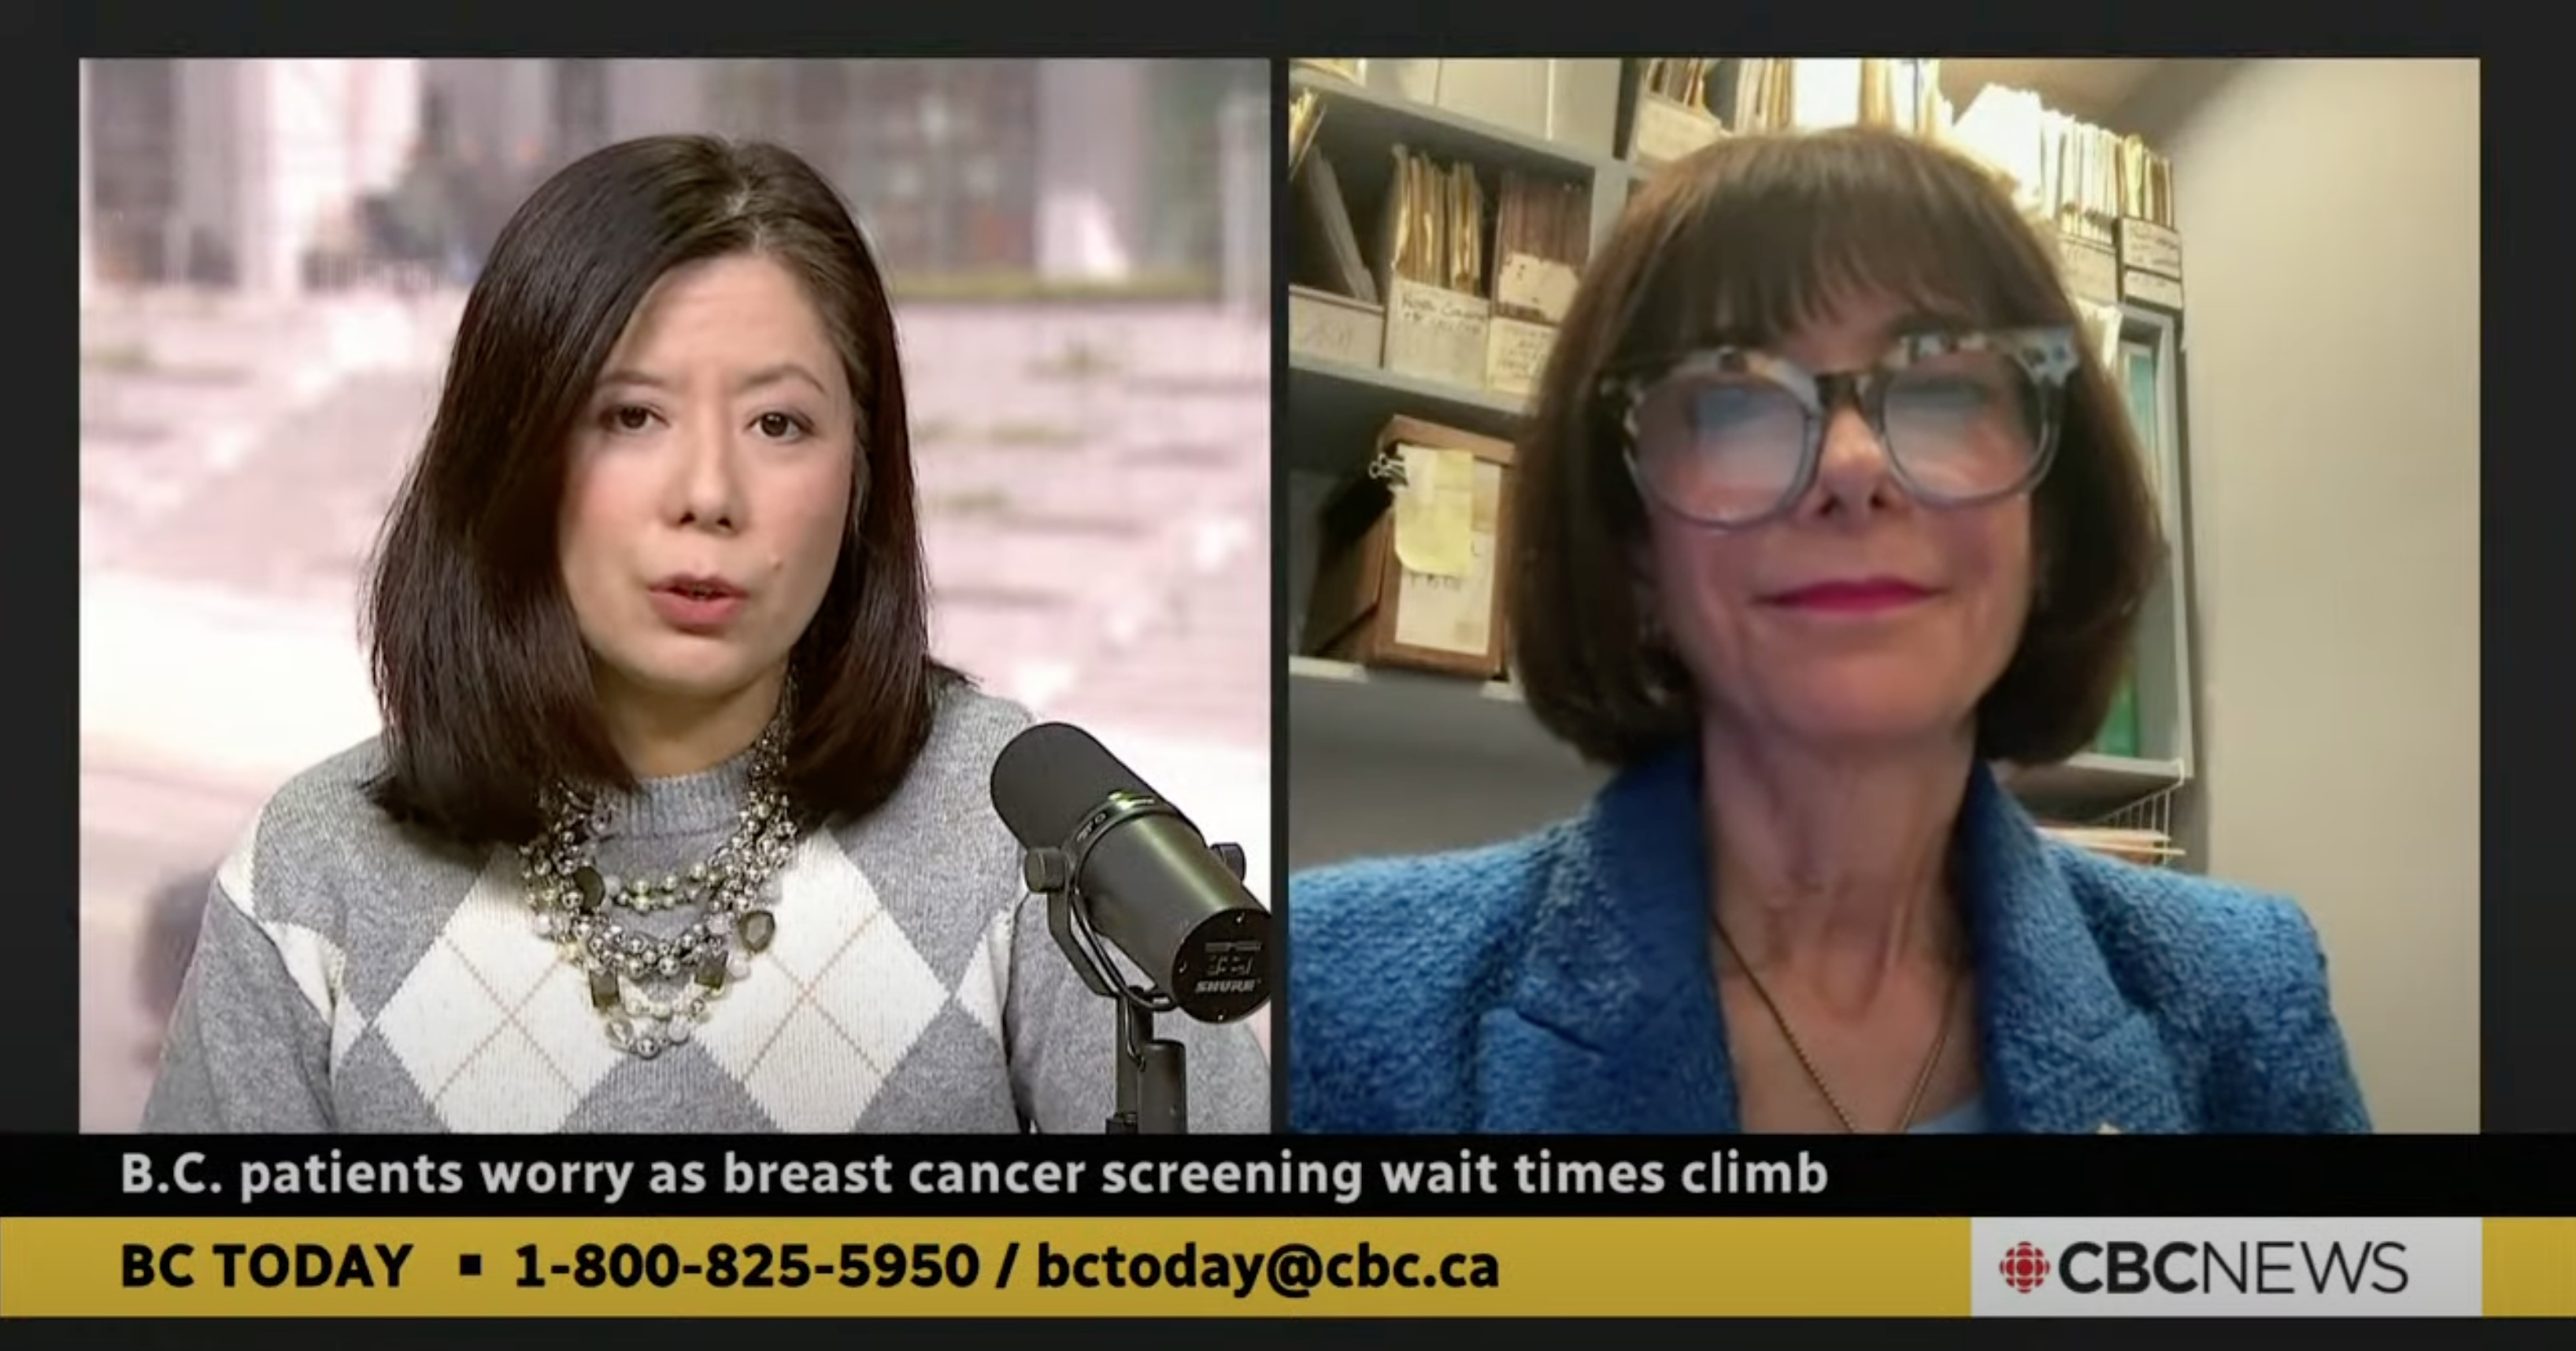 BCRS Member, Dr. Paula Gordon, speaks to the wait times for Breast Imaging in BC.